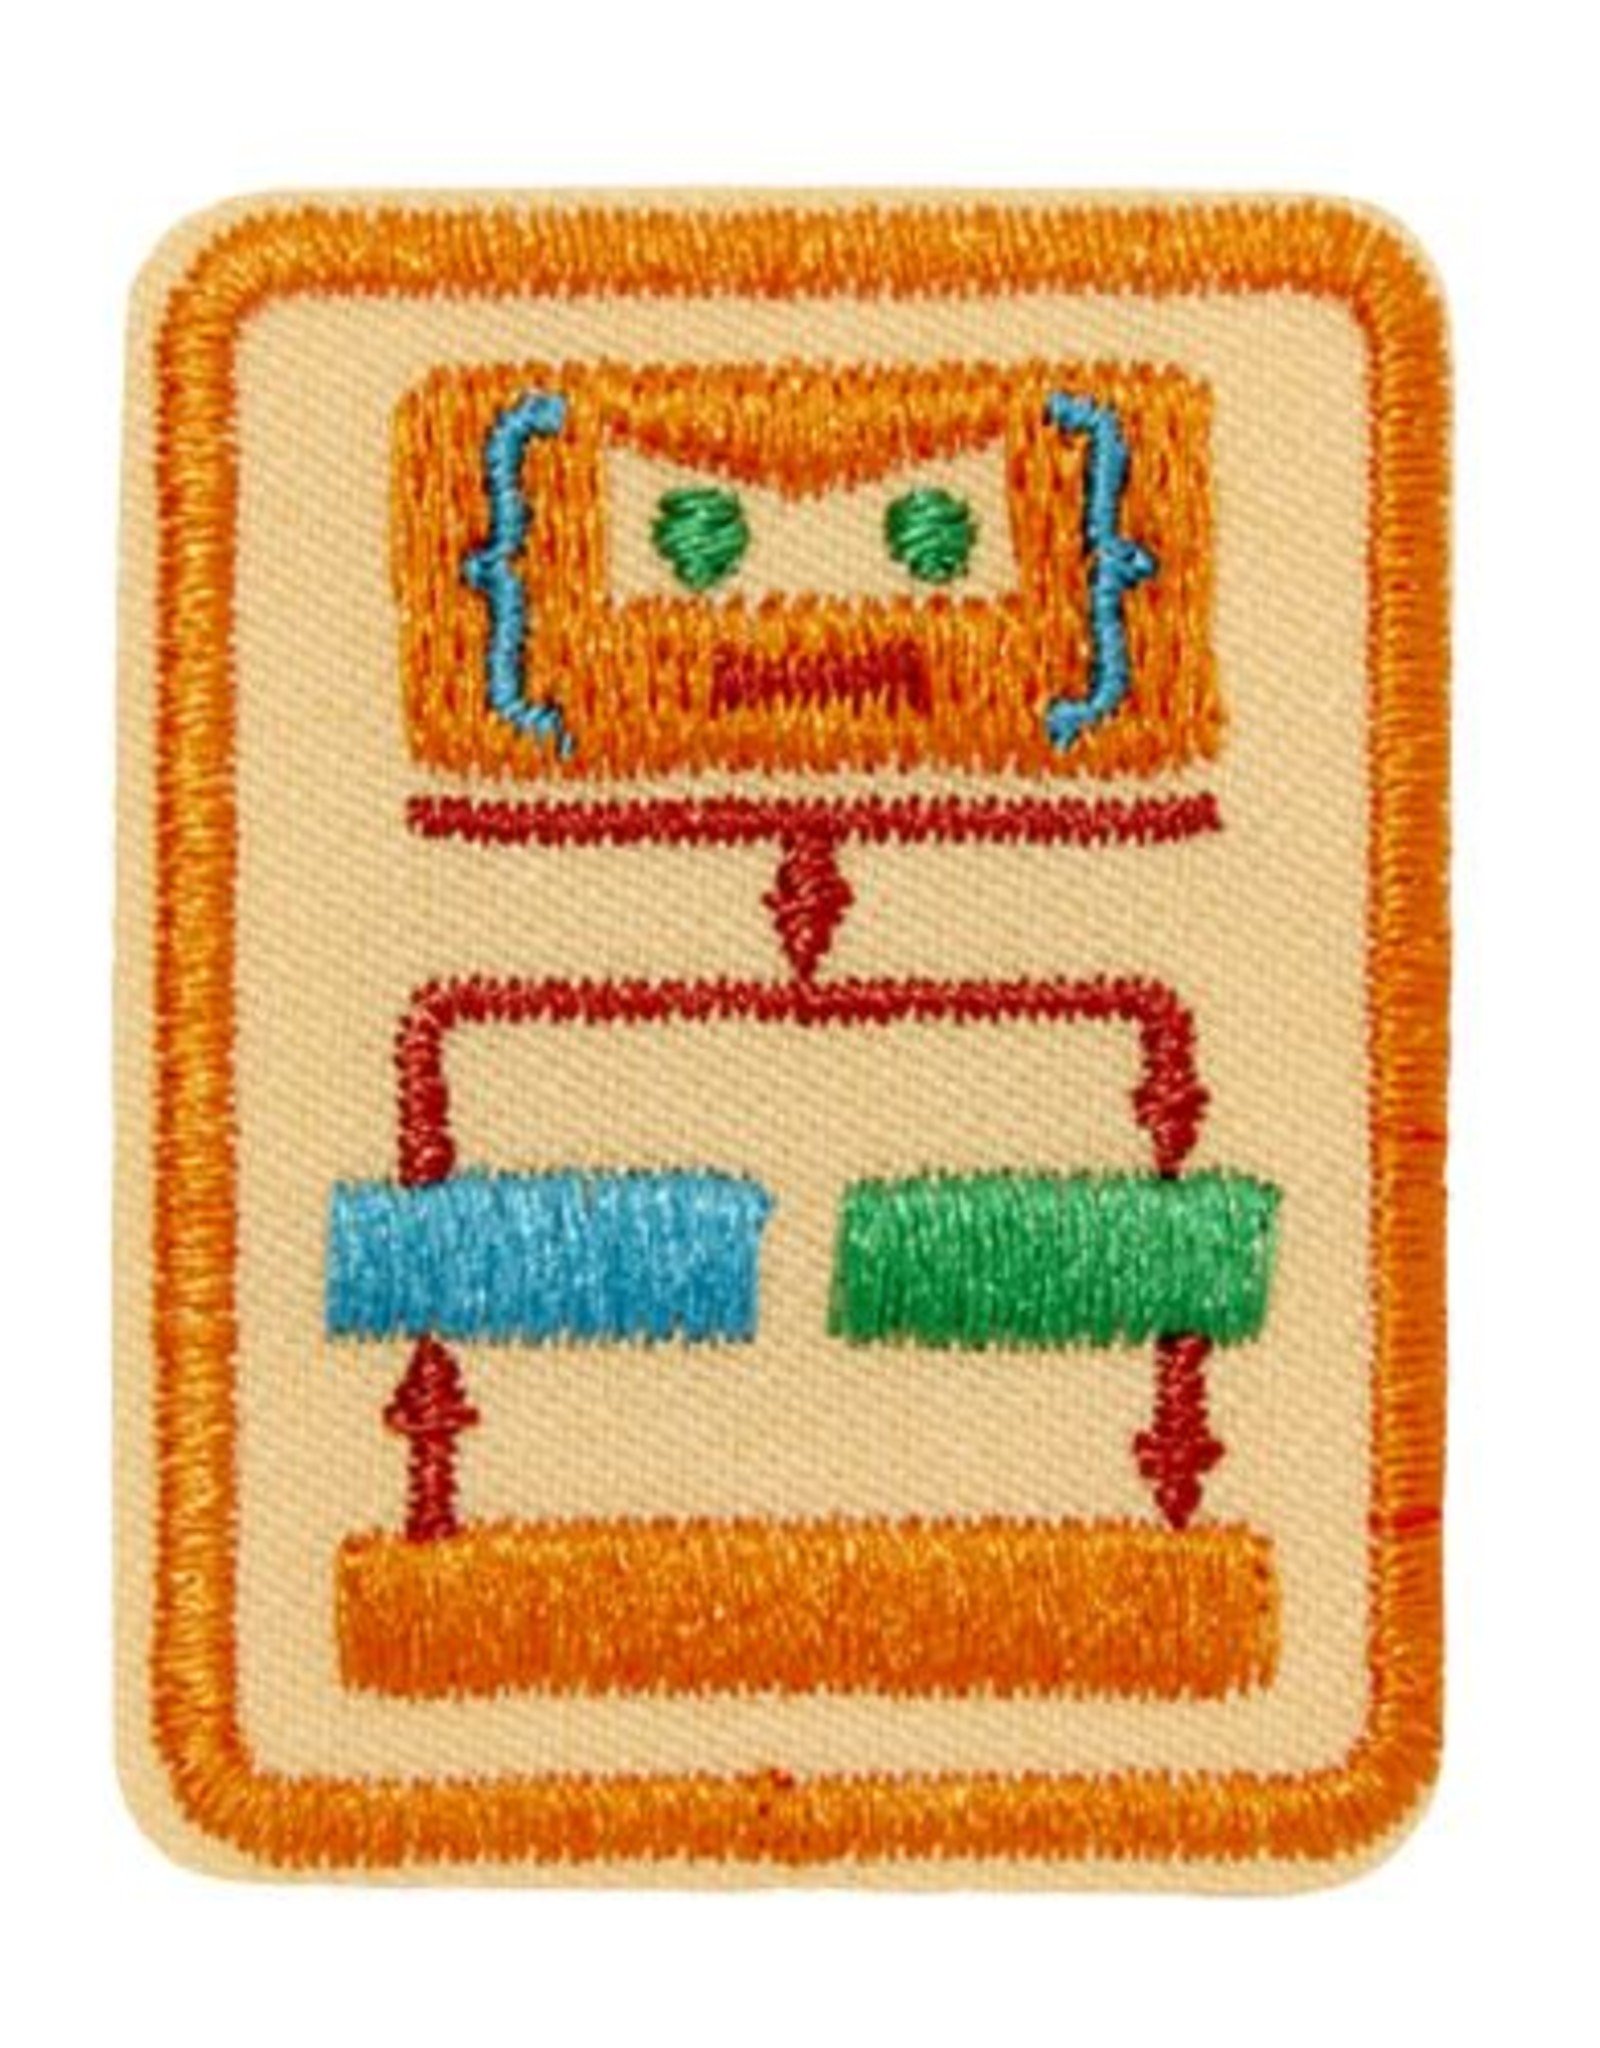 GIRL SCOUTS OF THE USA Senior Programming Robots Badge